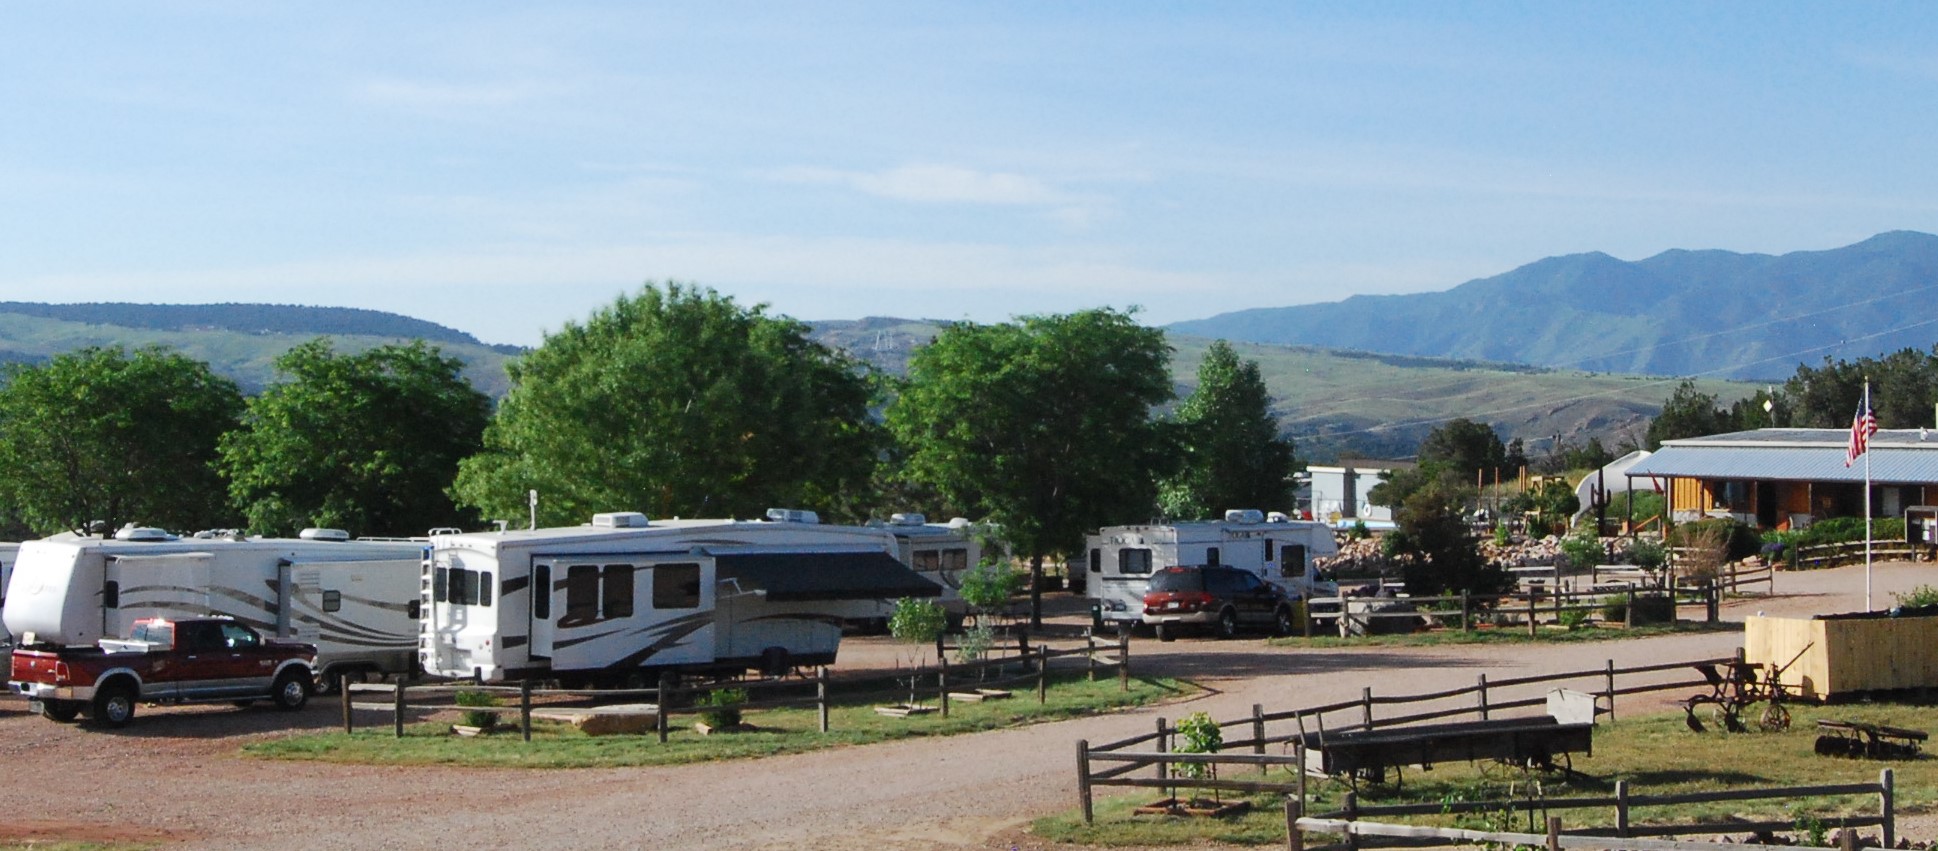 the picturesque mountain ranges loom in the background behind a row of bushy trees overlooking the RV park.